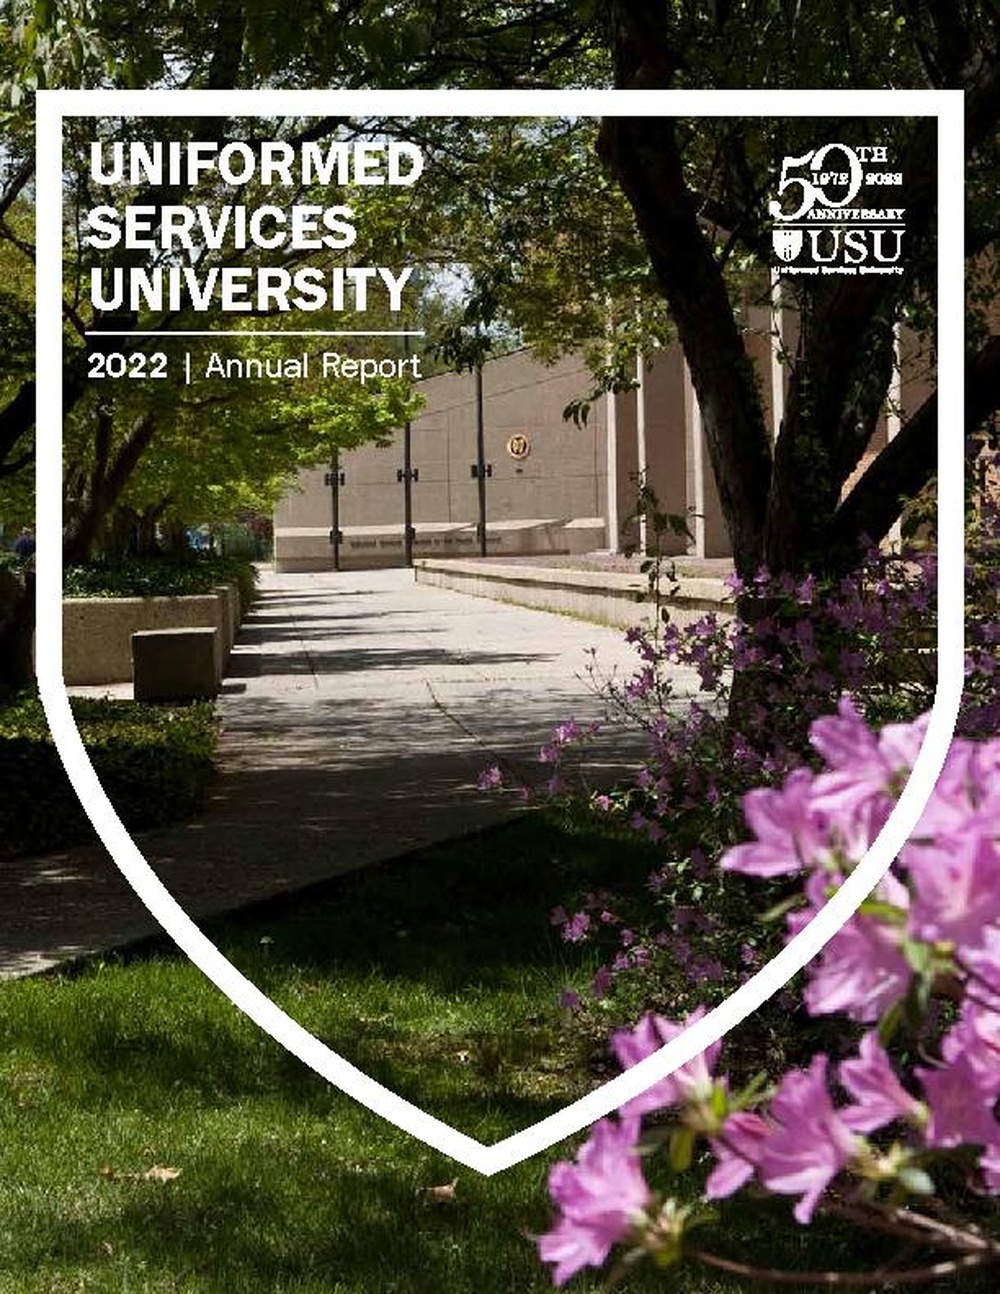 Uniformed Services University&amp;#39;s 2022 Annual Report